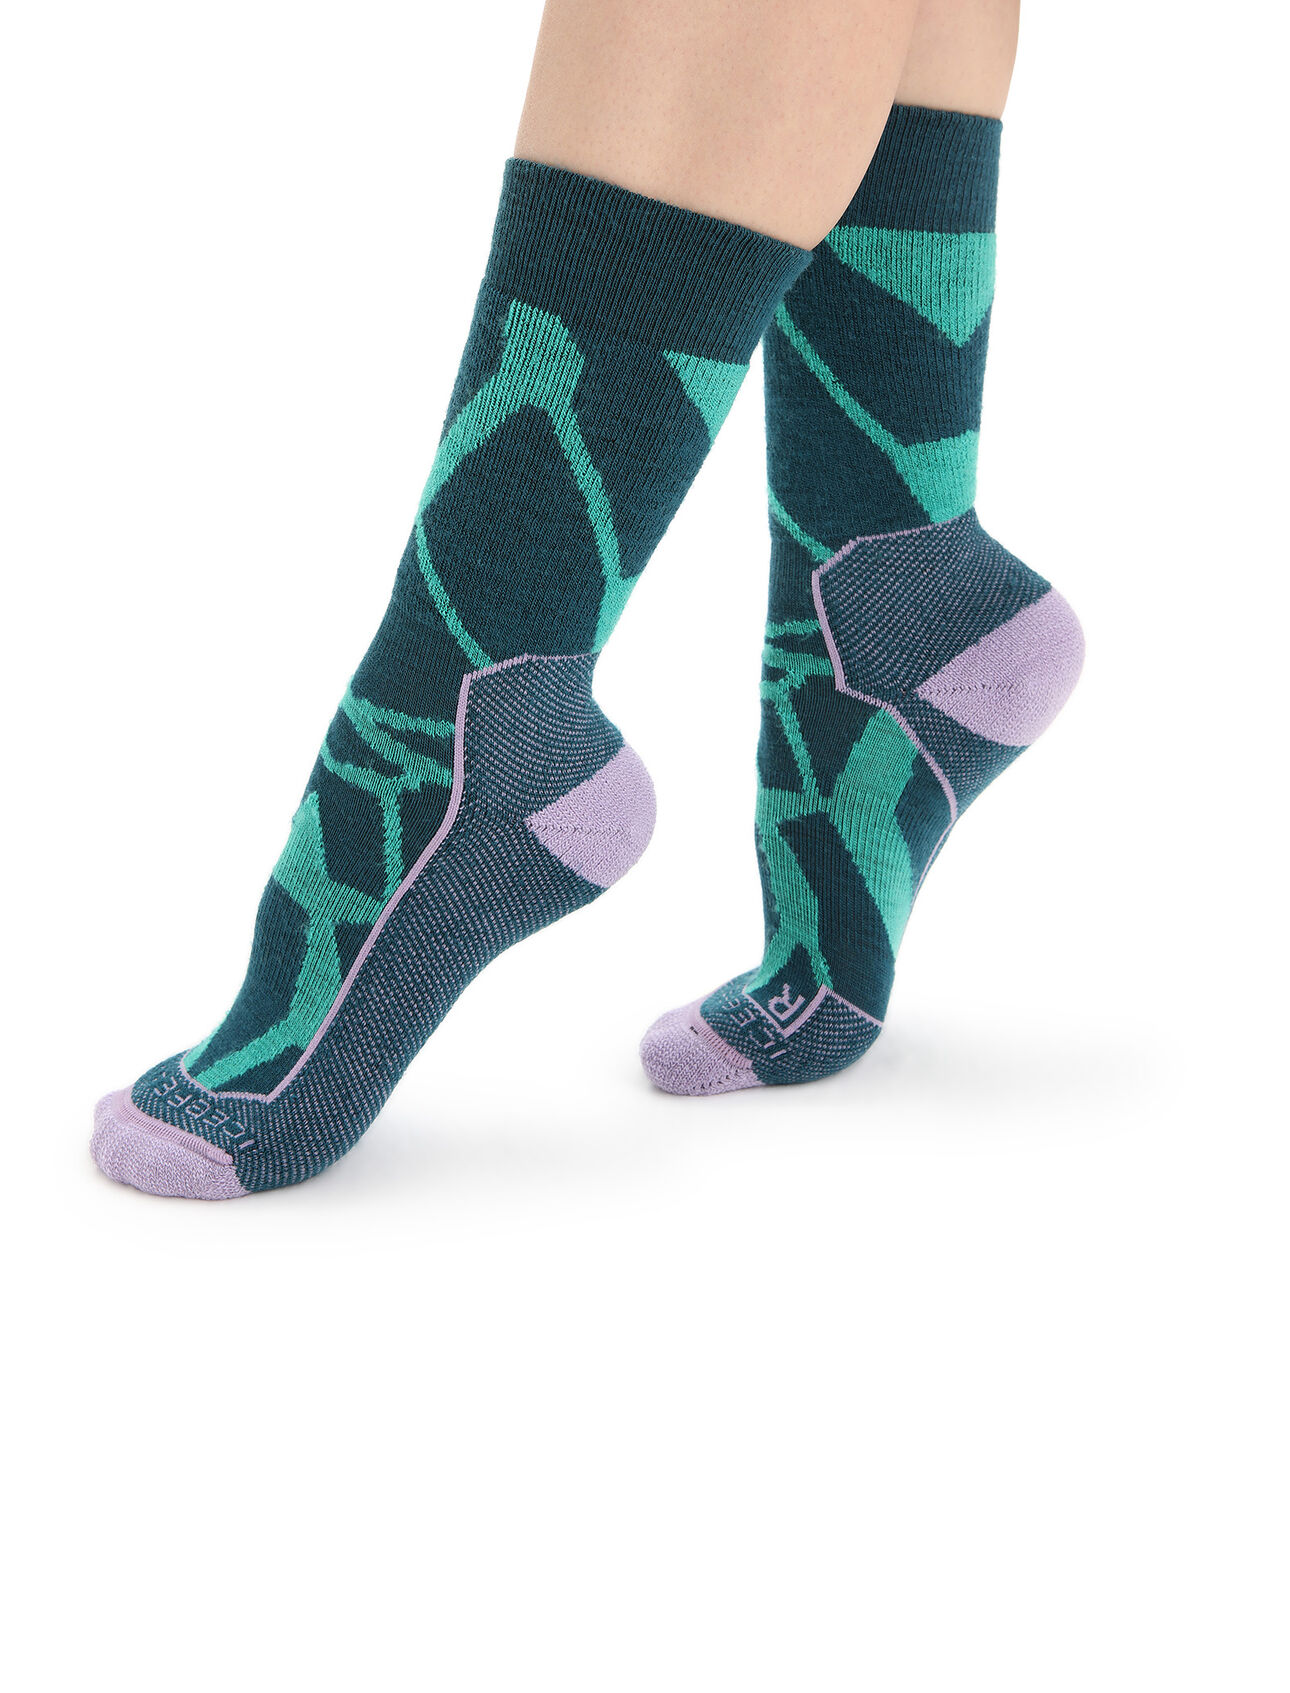 Womens Merino Hike+ Medium Crew Socks Fractured Landscapes Durable, crew-length merino socks that are stretchy and naturally odor-resistant with medium cushion, the Hike+ Medium Crew Fractured Landscapes socks feature an anatomical sculpted design for added support on day hikes and backpacking  trips.